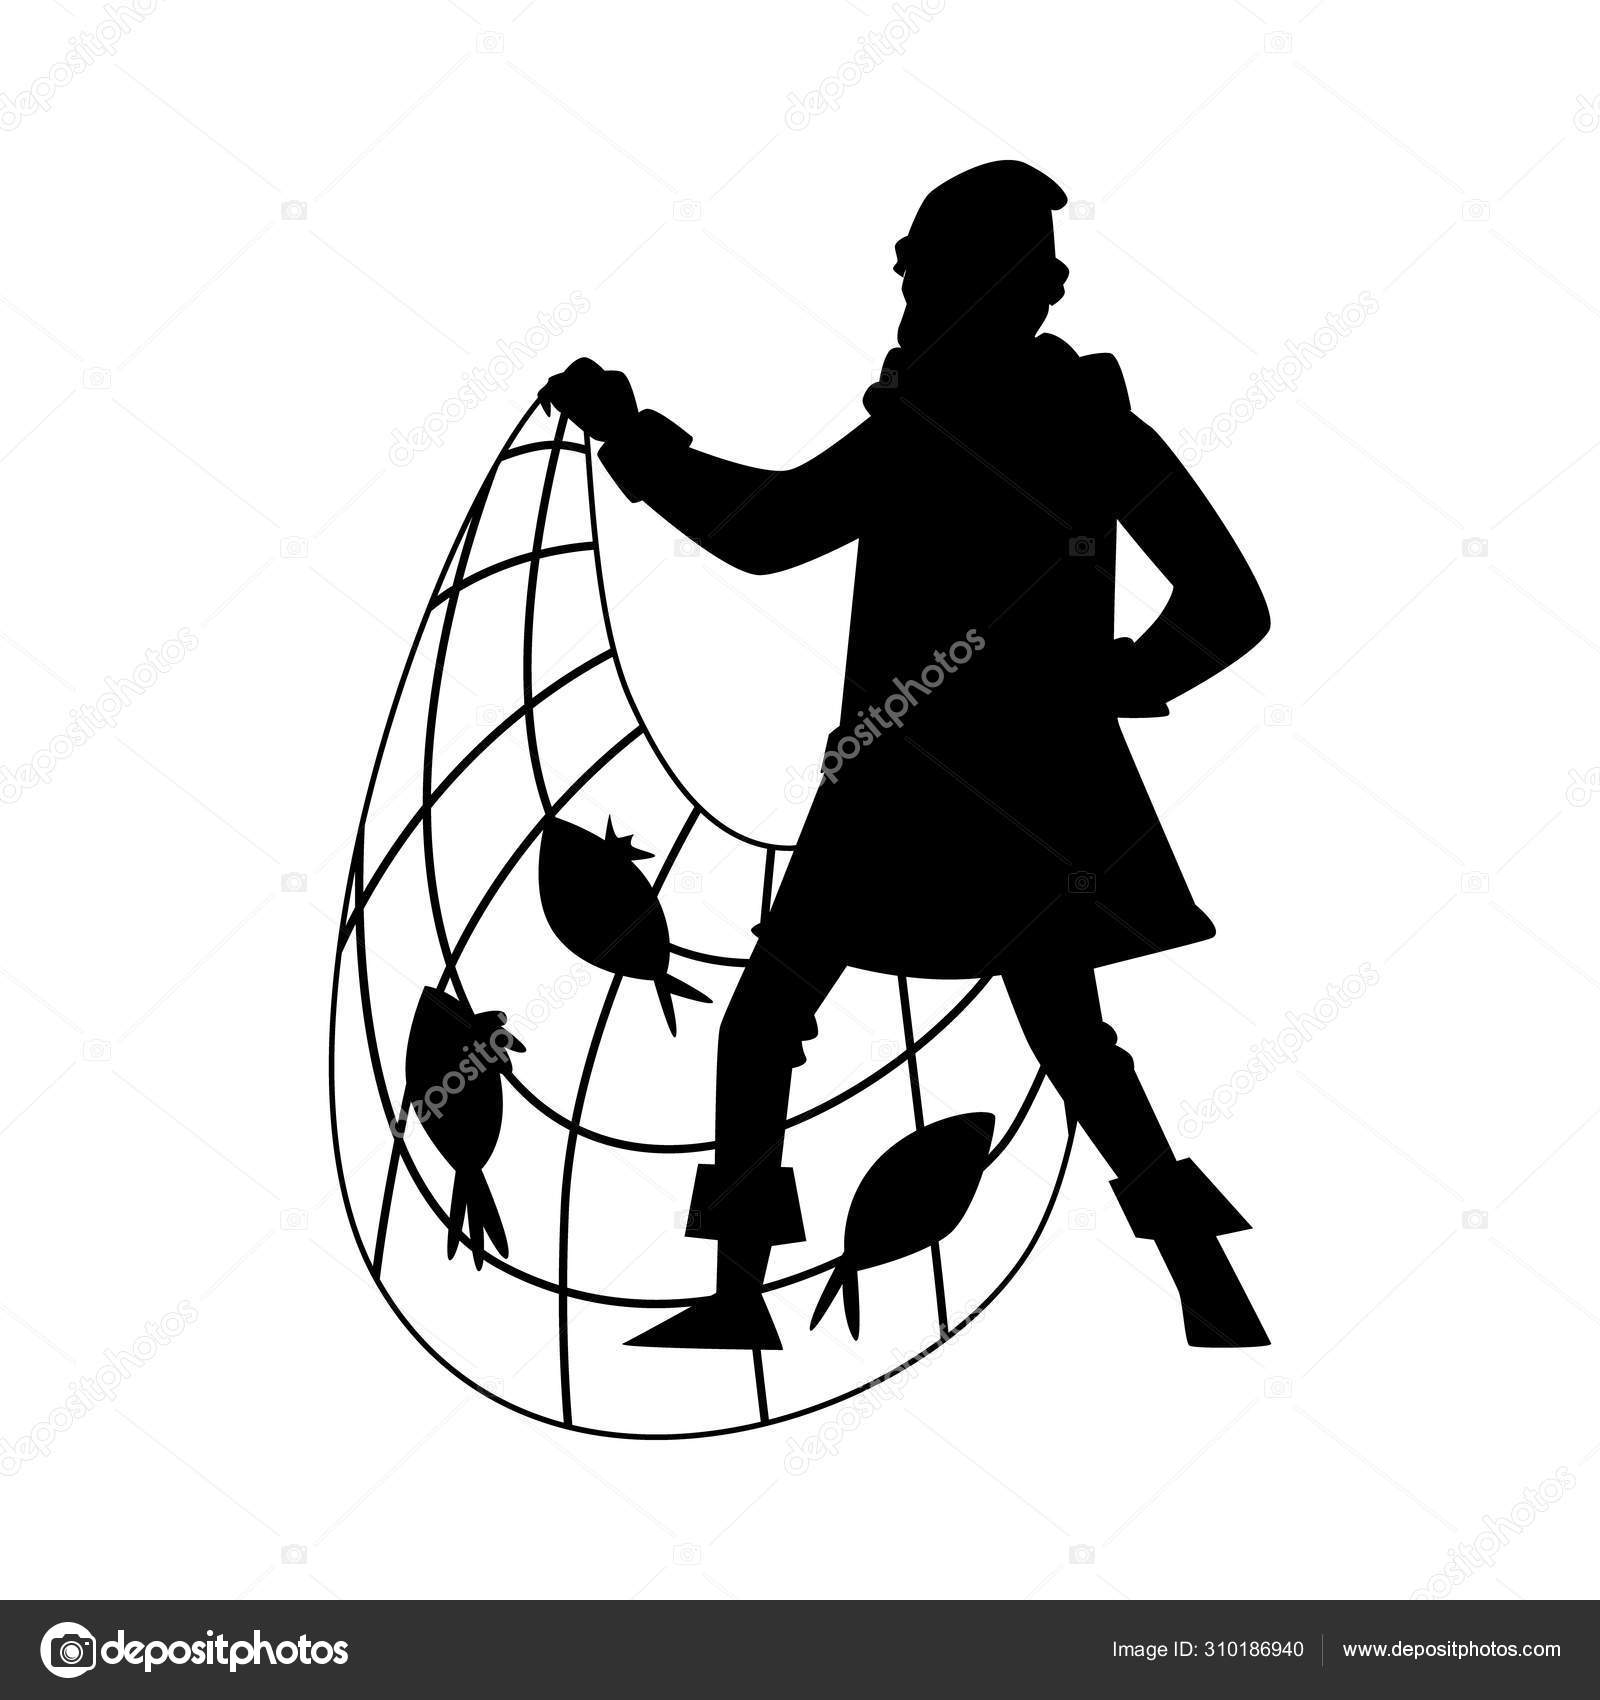 Black silhouette of a fisherman with fishnet vector illustration